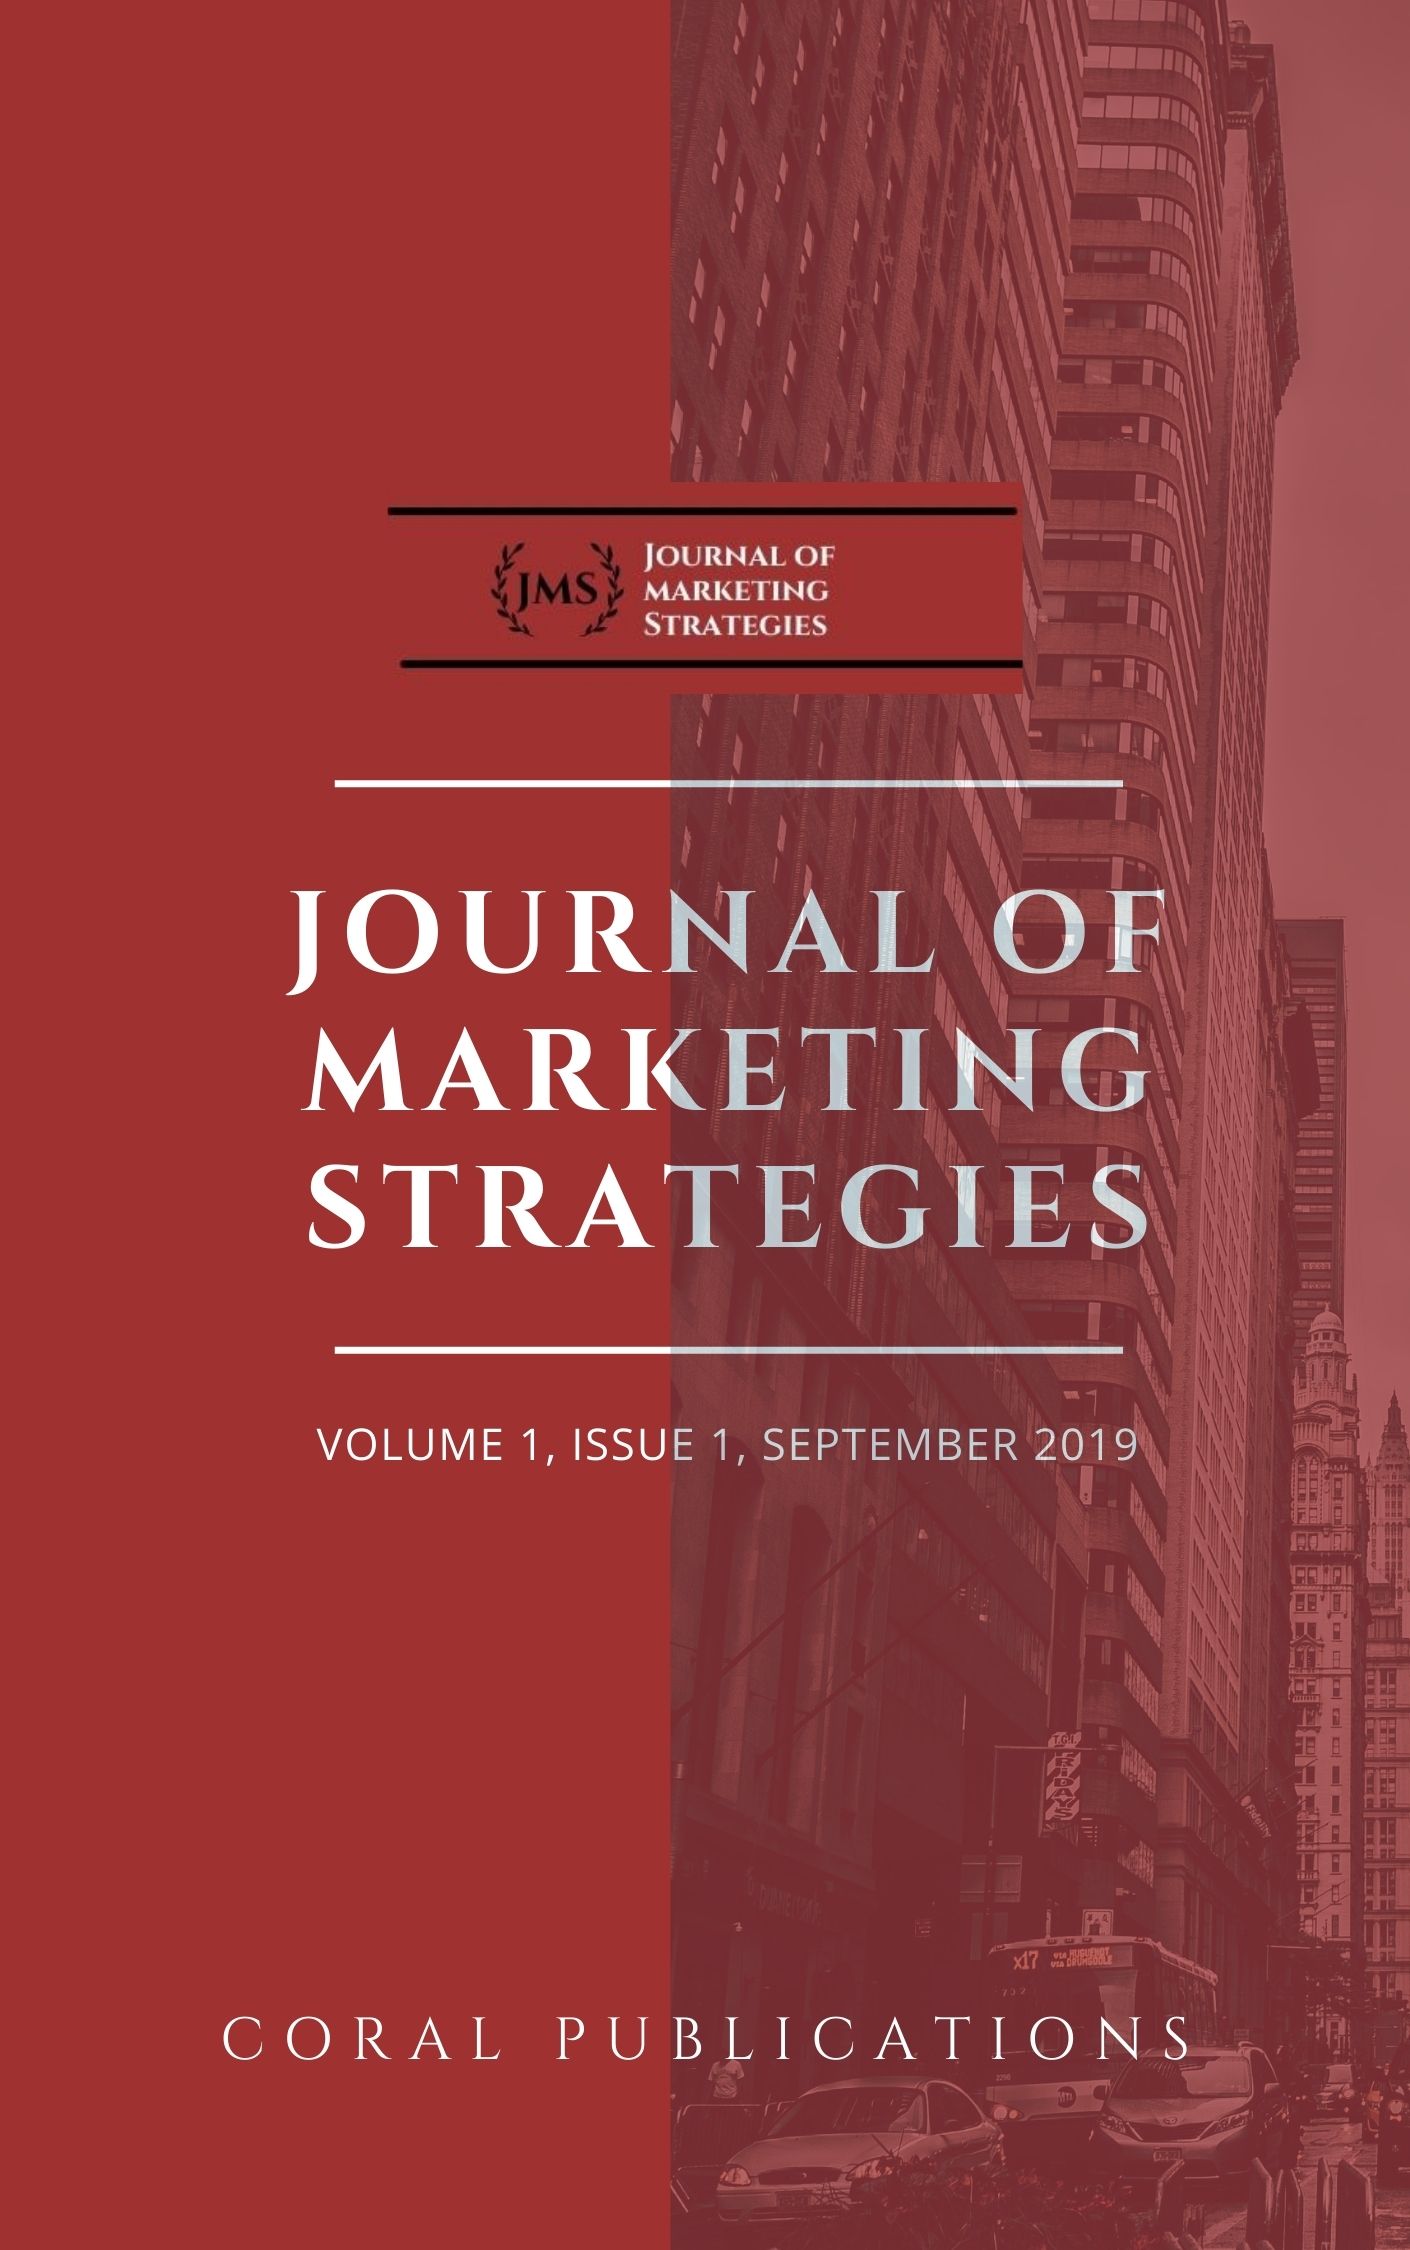 					View Vol. 1 No. 1 (2019): Journal of Marketing Strategies (Vol. 1, Issue 1) September 2019
				